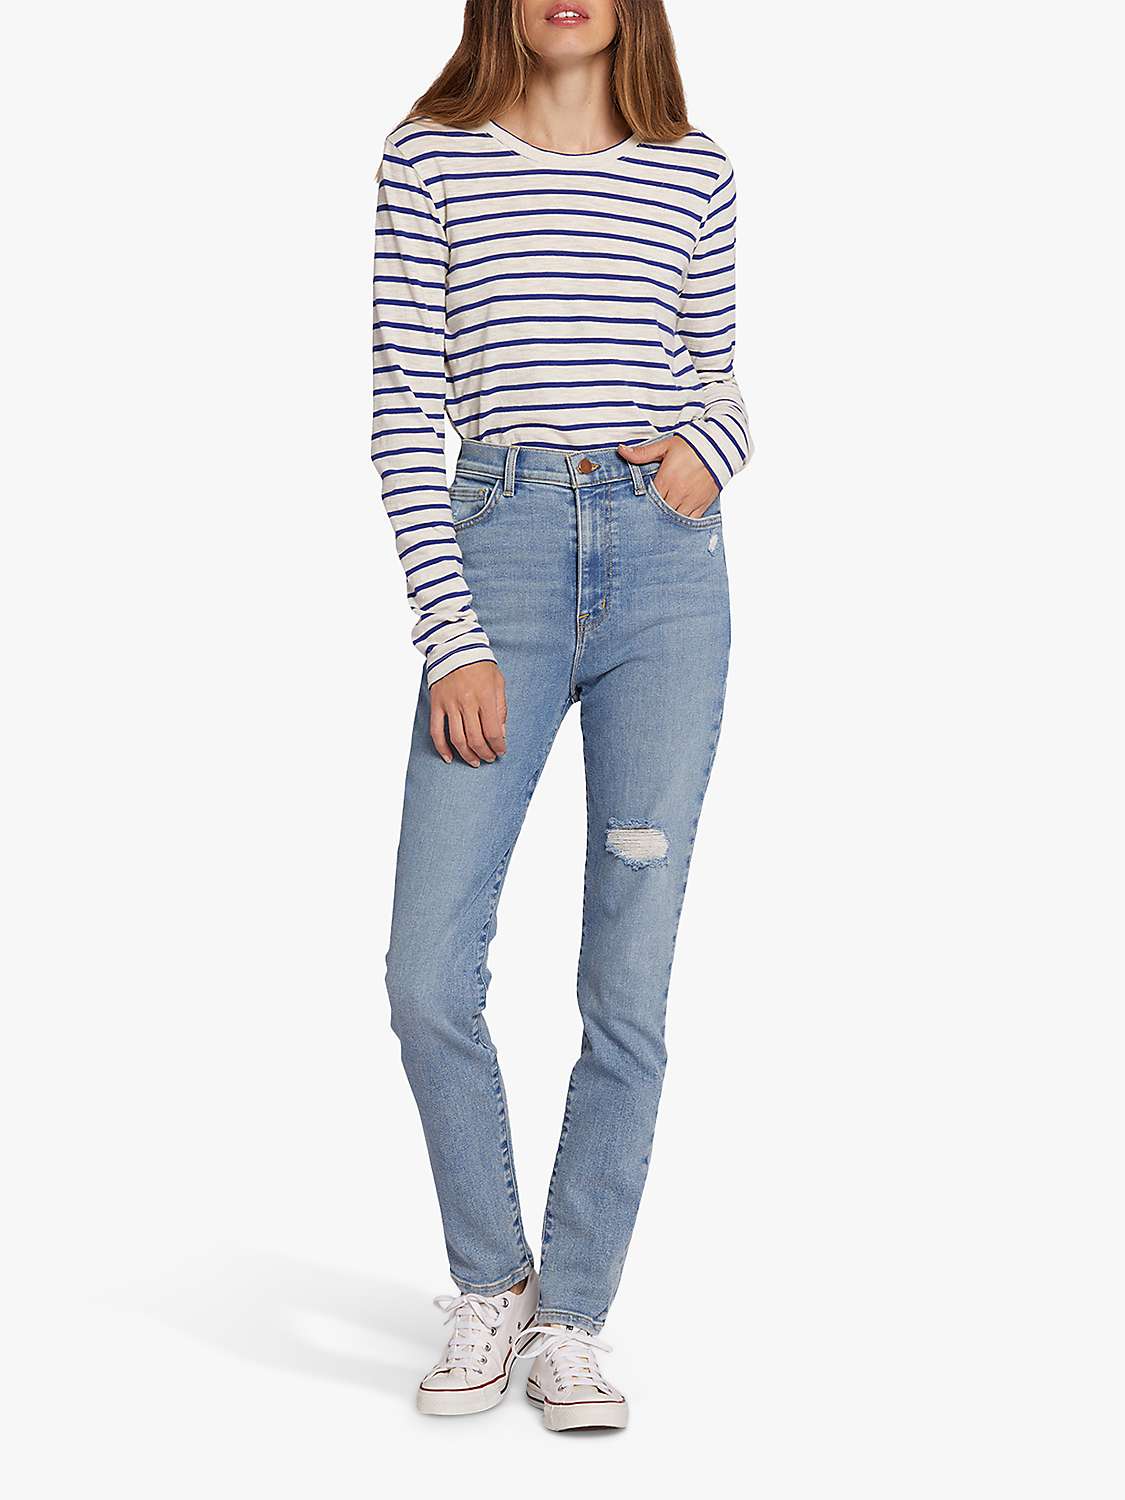 Buy Current/Elliott The Freeway High Rise Distressed Cigarette Jeans, Camino Light Blue Online at johnlewis.com